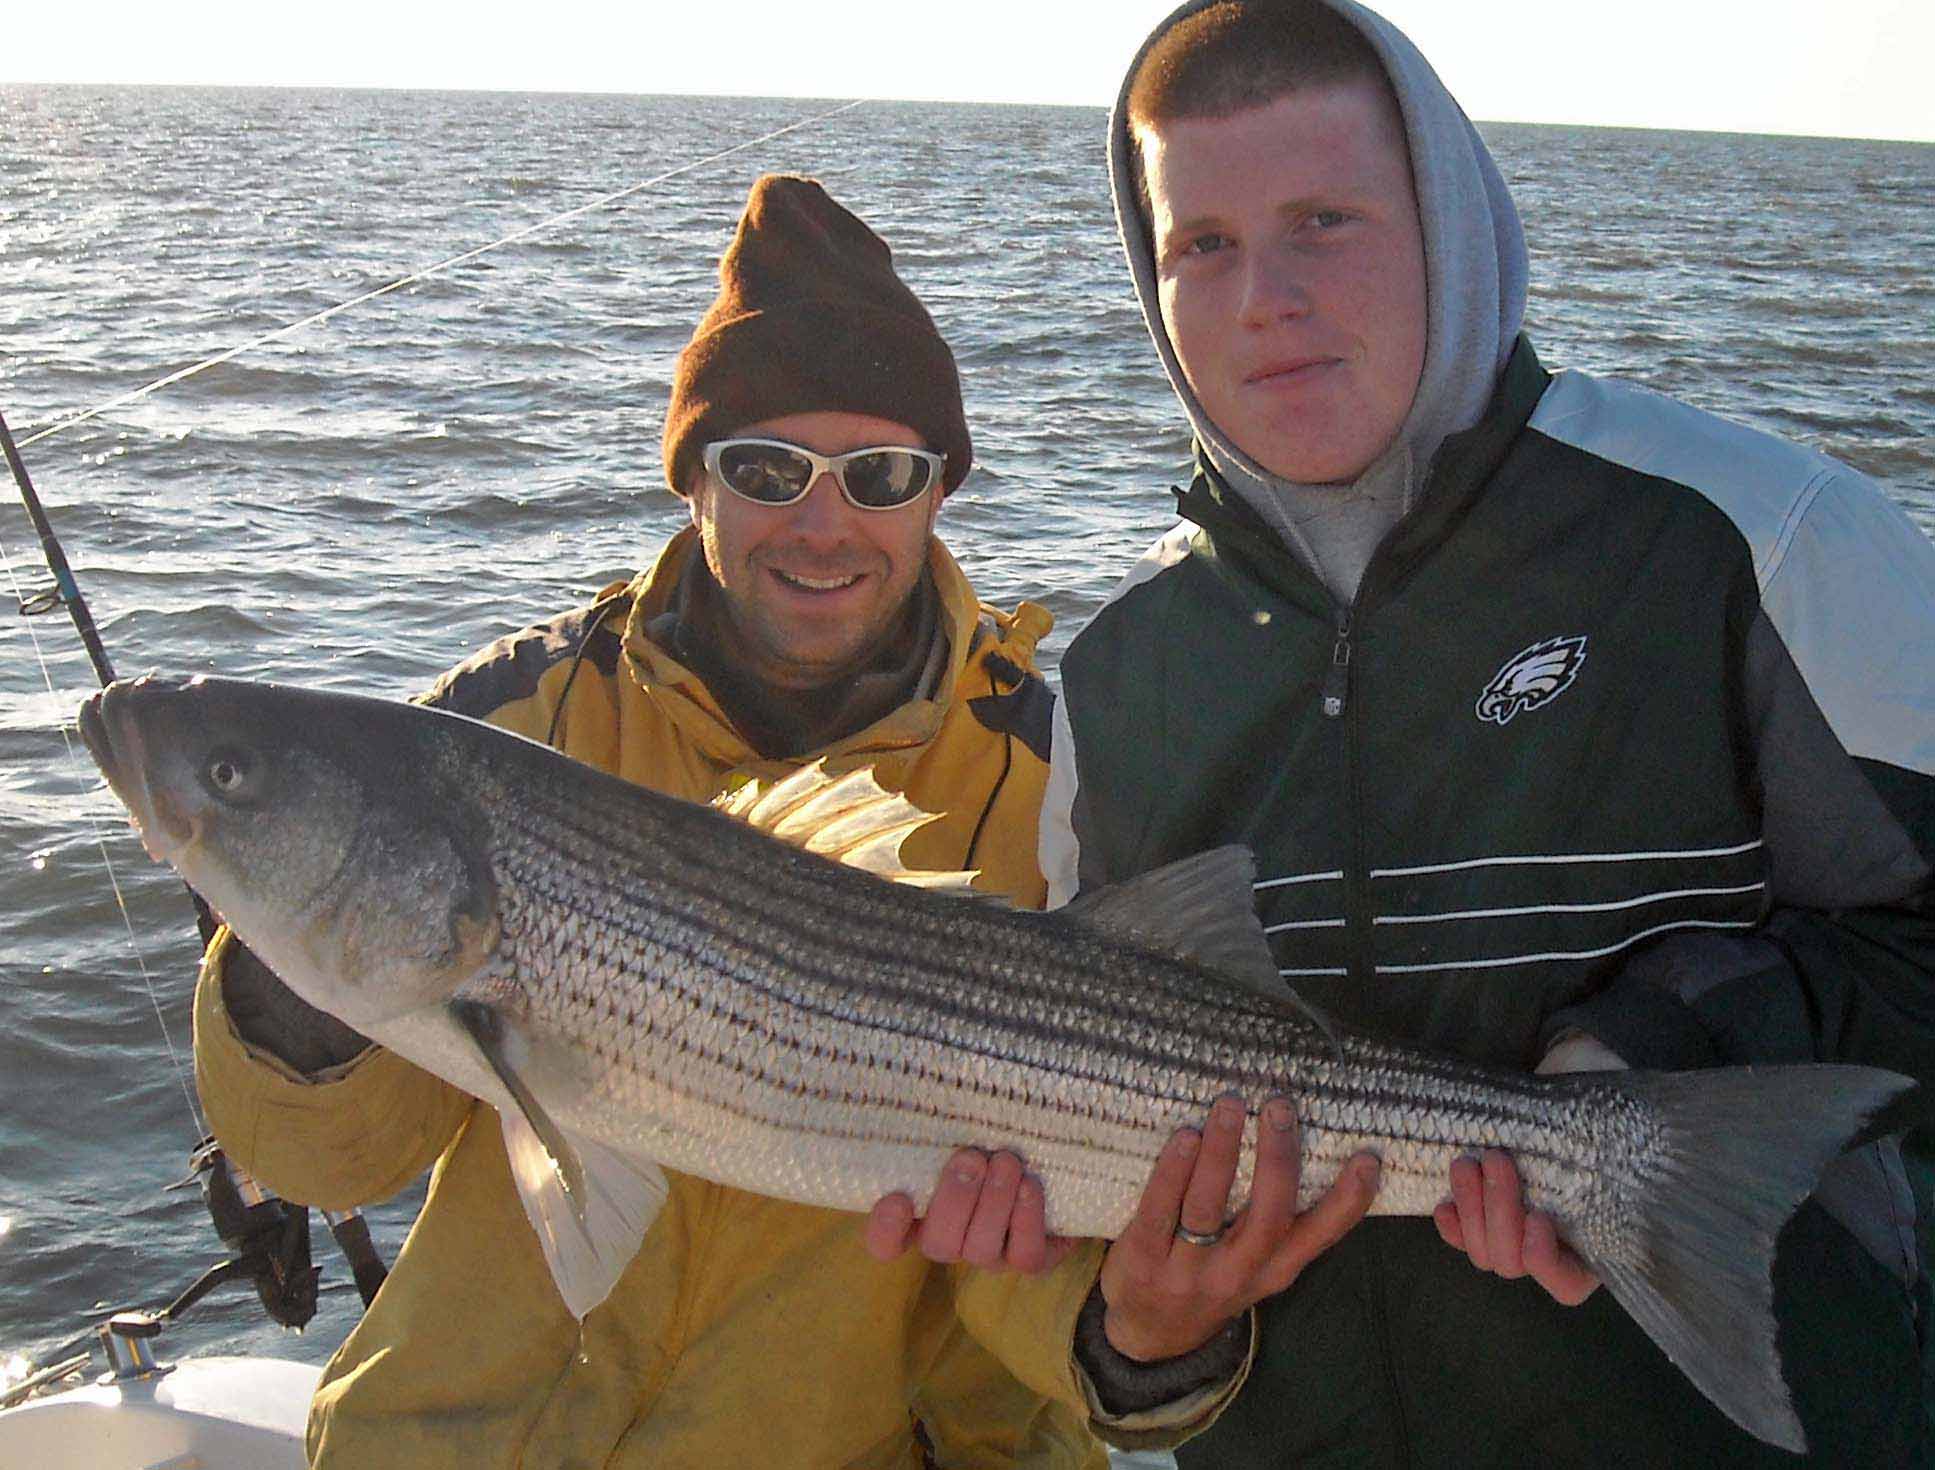 Capt Scott Newhall catches nice striped bass and a variety of other species.